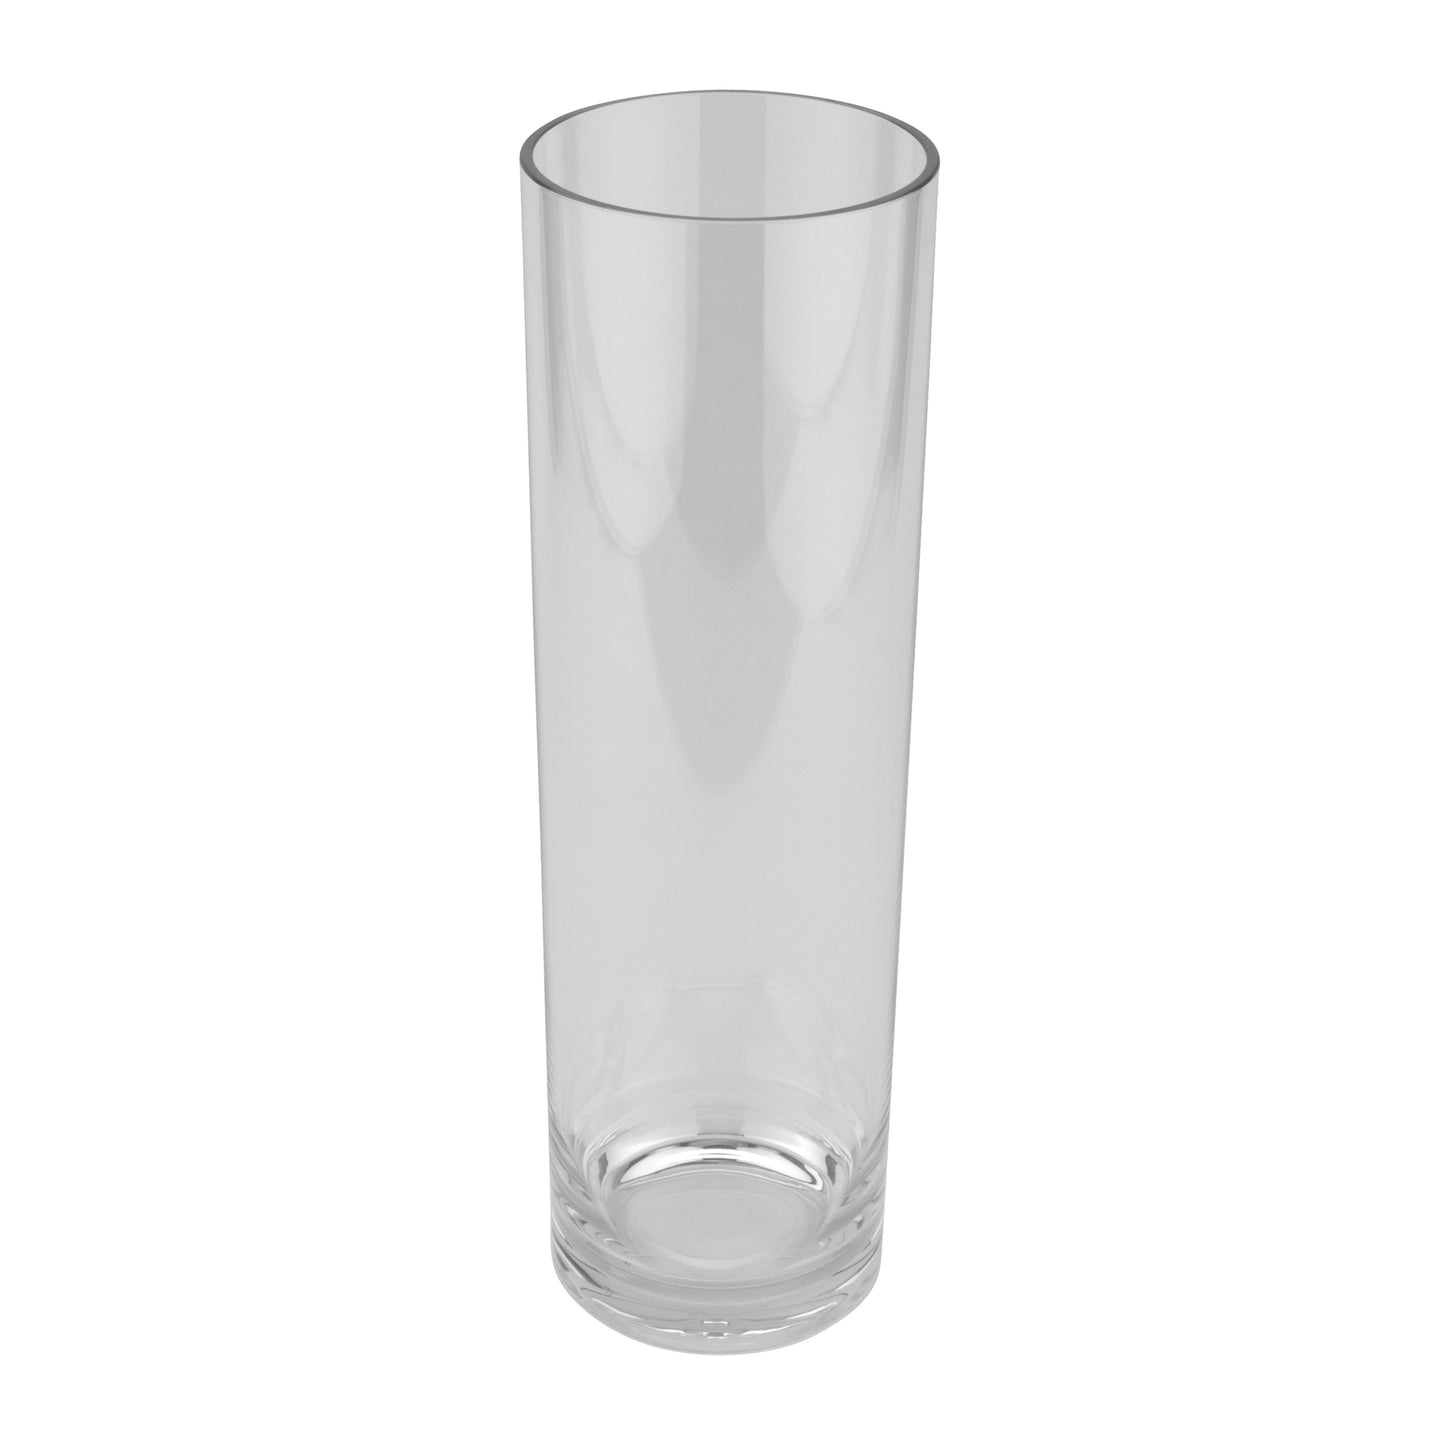 17.75" Tall, Tabletop, Display, Accent Vase, Break Resistant Plastic, 5.25" dia., G.E.T. Table Accessories